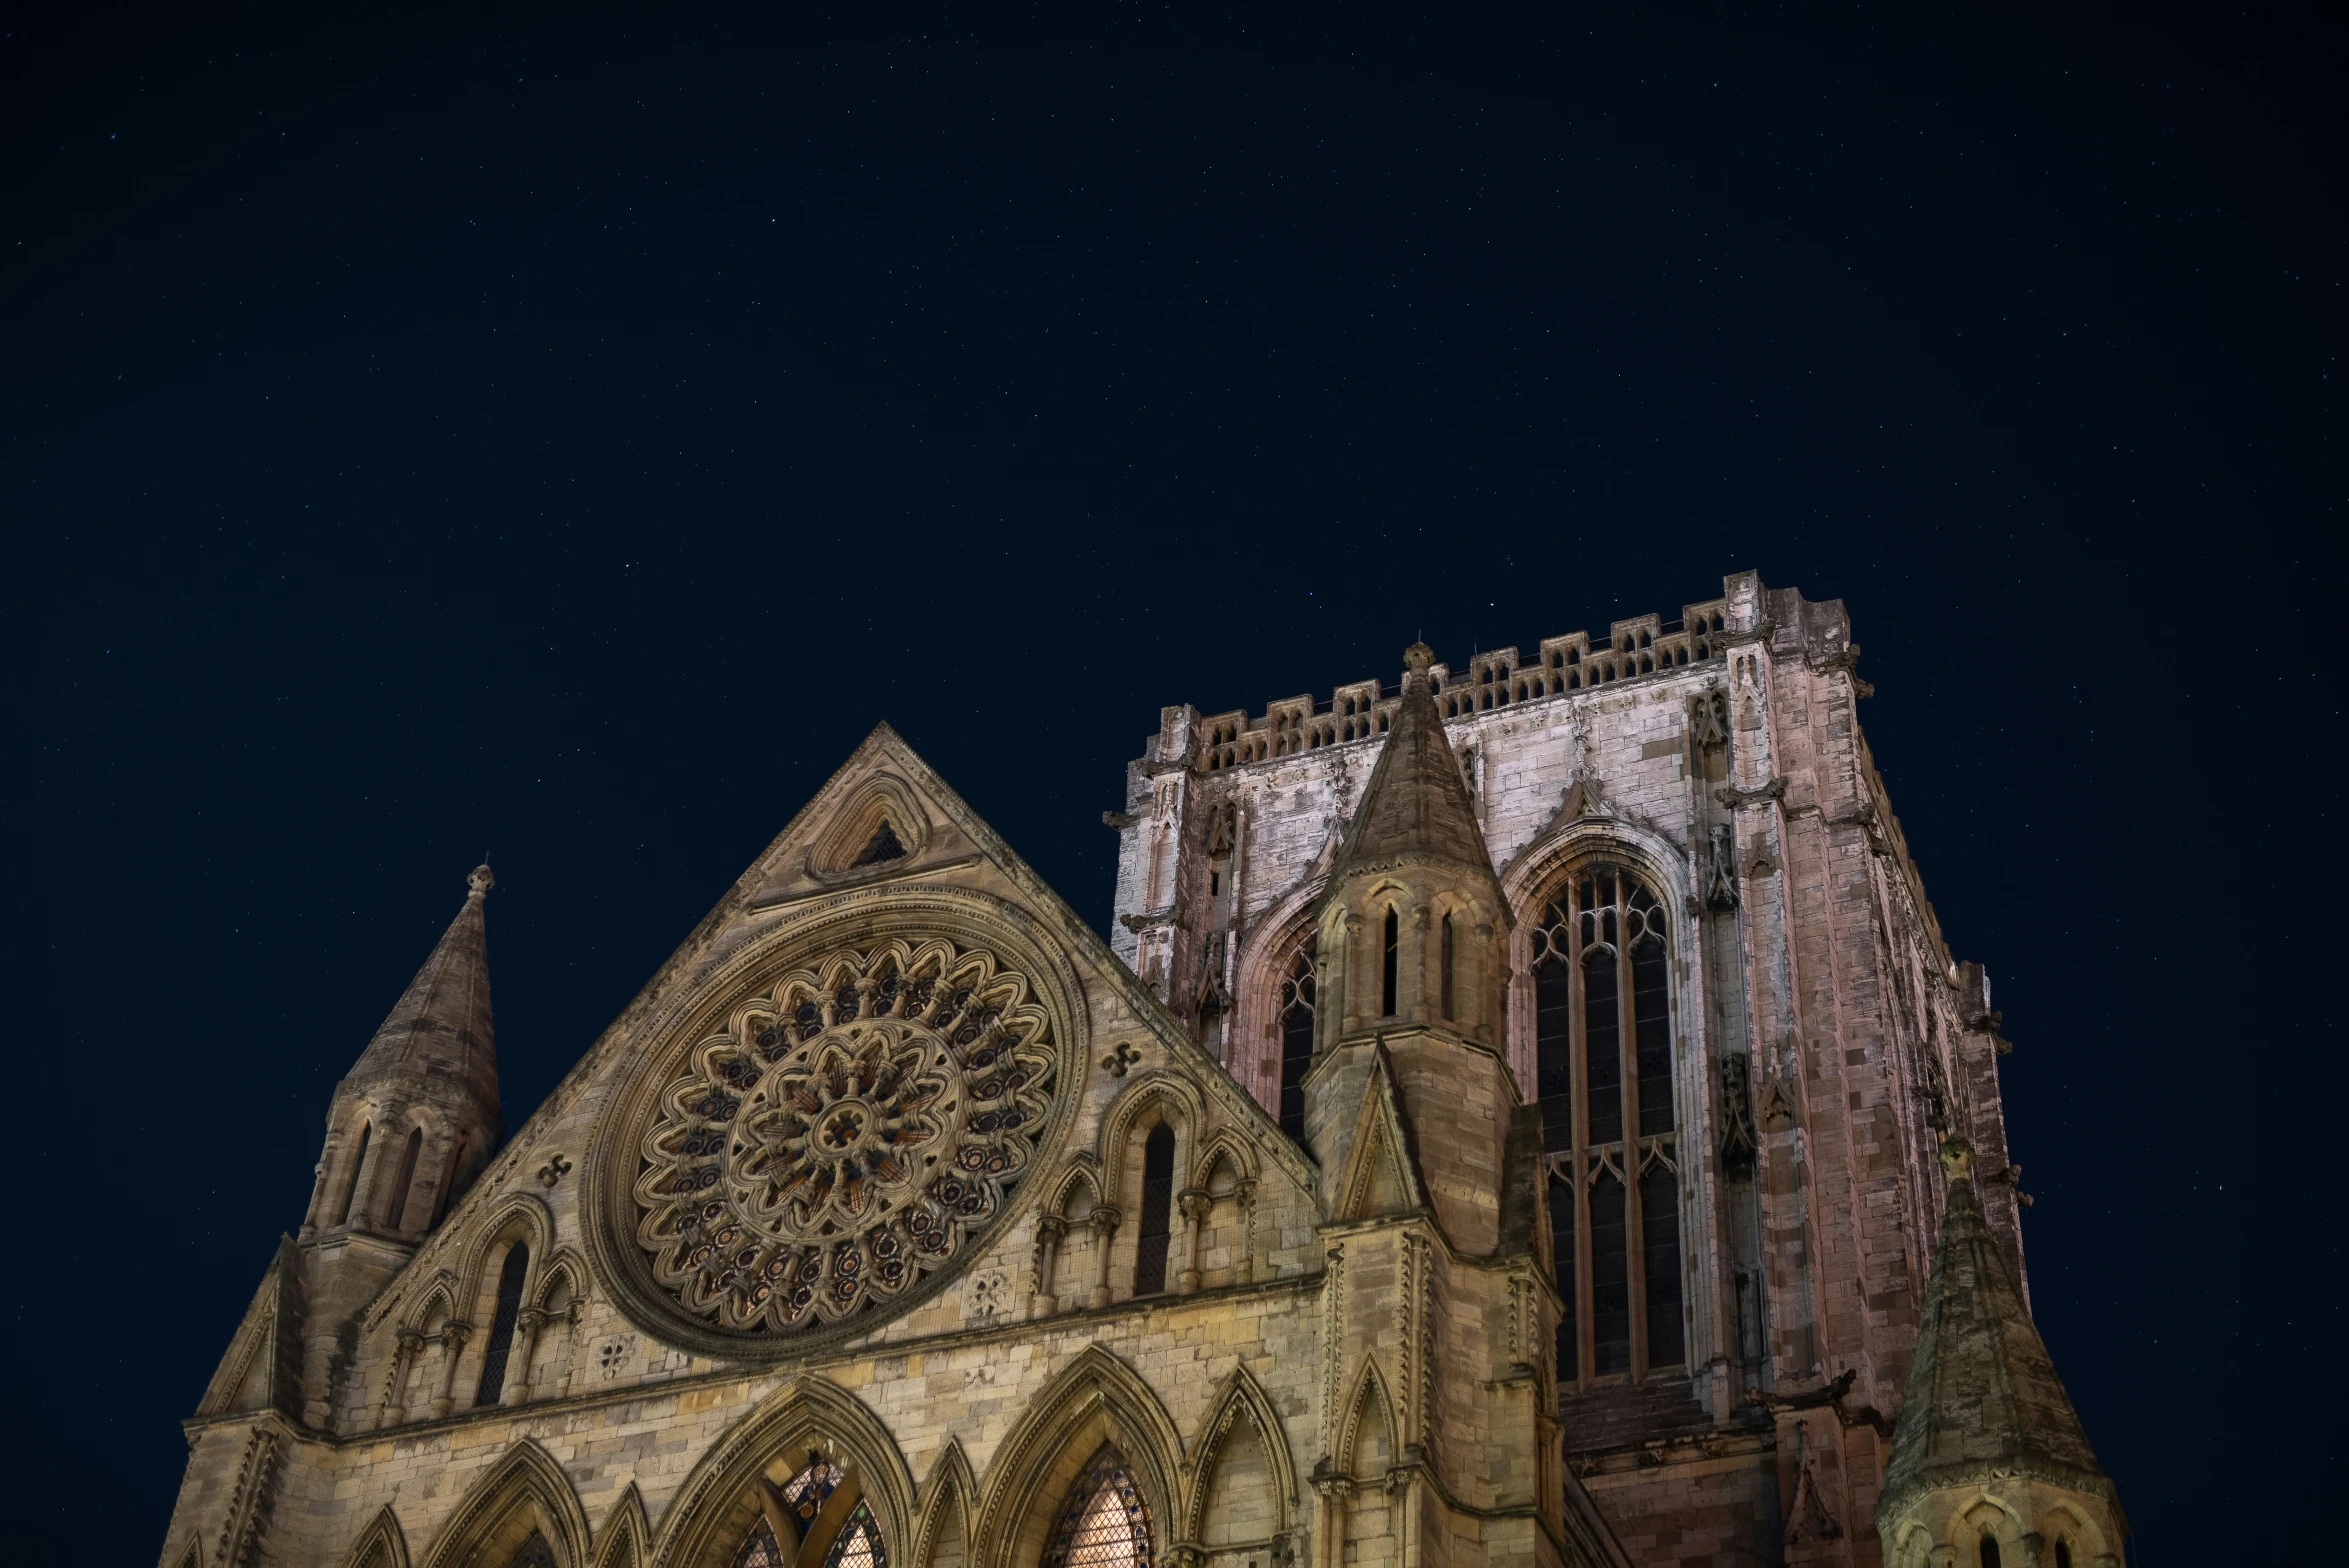 an ancient cathedral lit up at night under the starry sky